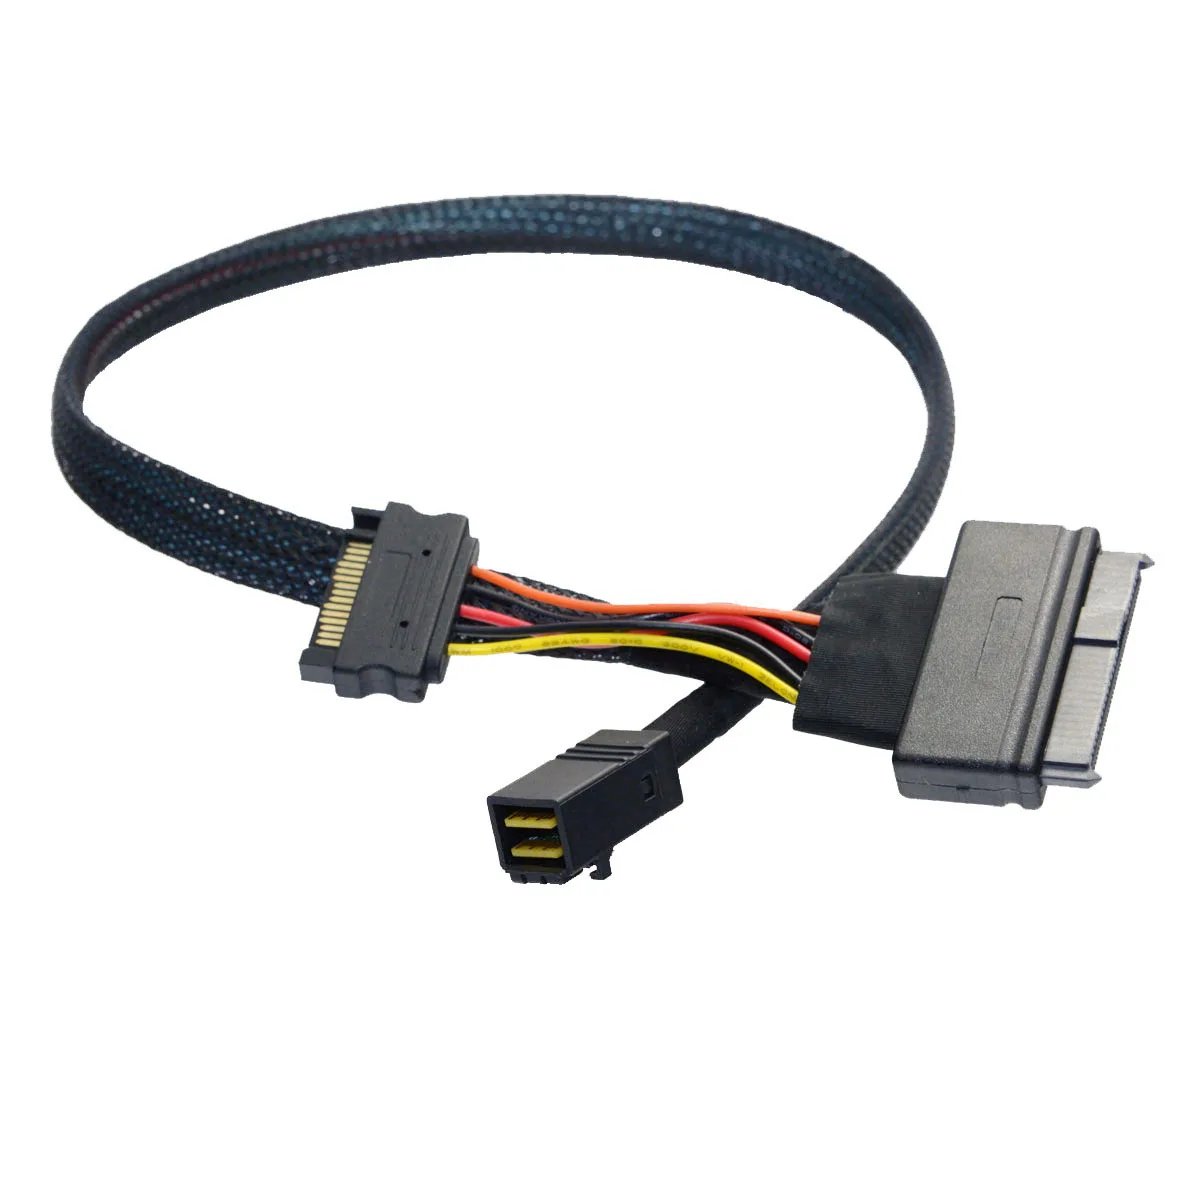 1m 0.5m HD Mini-SAS (SFF-8643) To U.2 SFF-8639 Date Cable For 2.5 NVMe SSDWith 15-Pin SATA Power Suitable For U.2 SSD Mining 12g internal mini sas hd sff 8643 to sff 8643 cable with sideband 100 ohm 1 m 3 3ft 2 pack